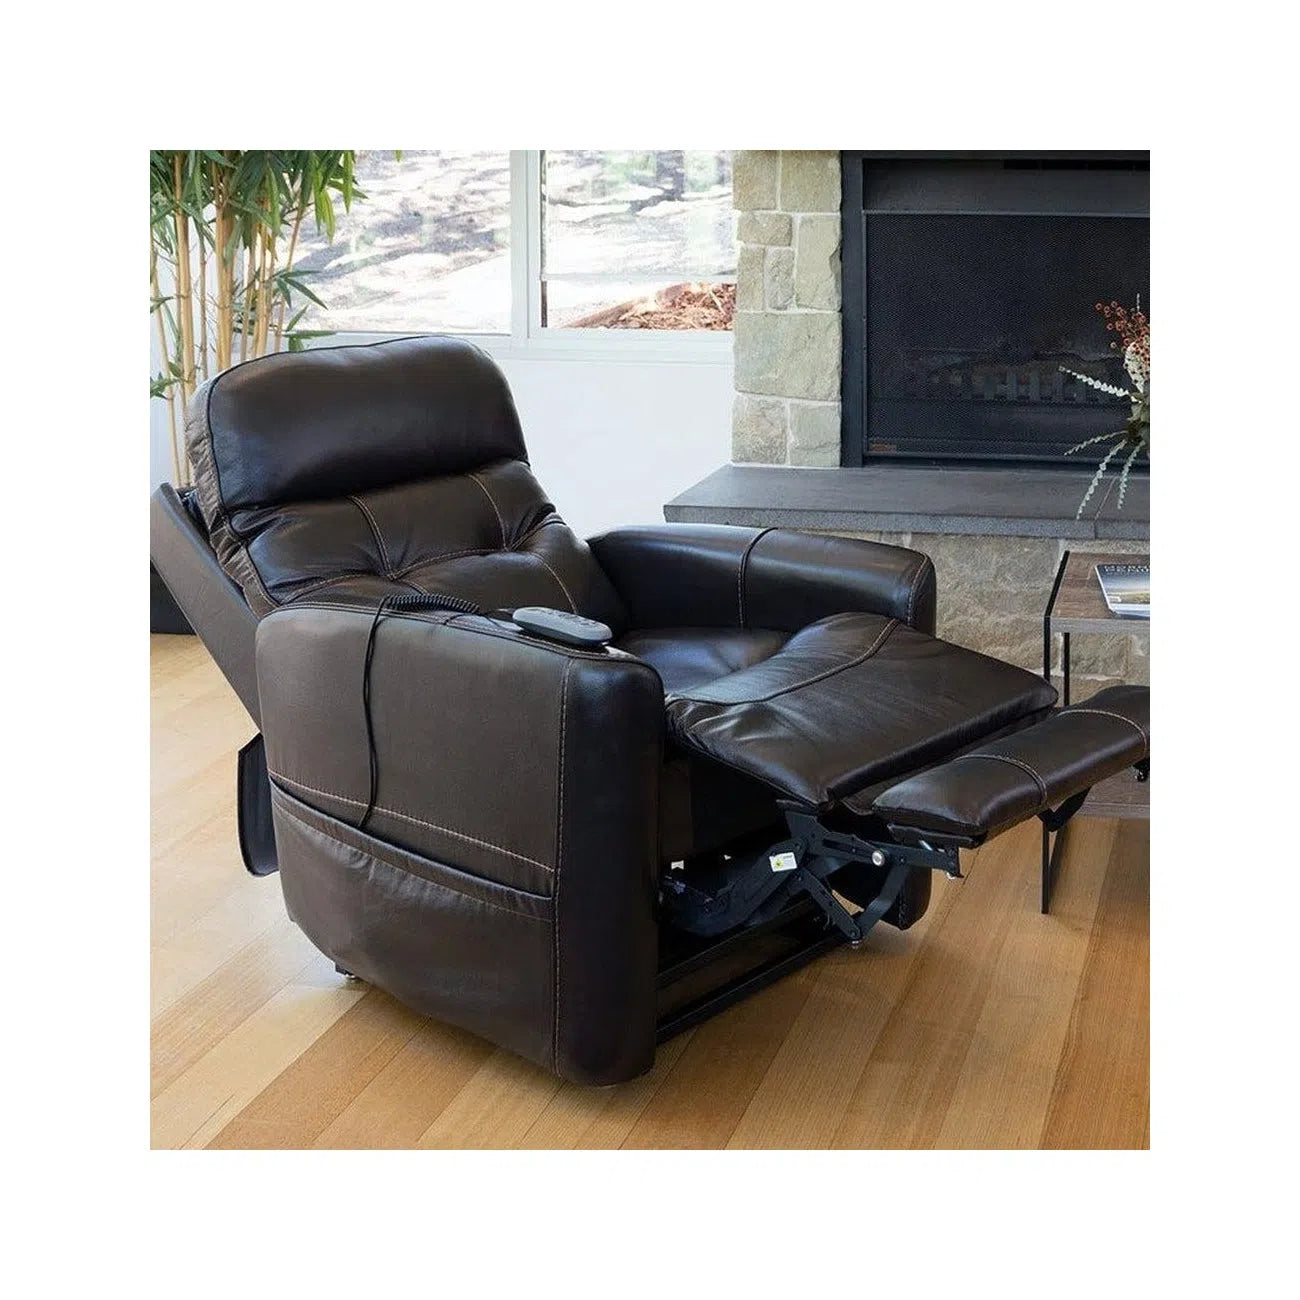 Ealing Dual Lift Lay Flat 158kg Limit Recliner with Headrest and Lumbar-Sleep Doctor